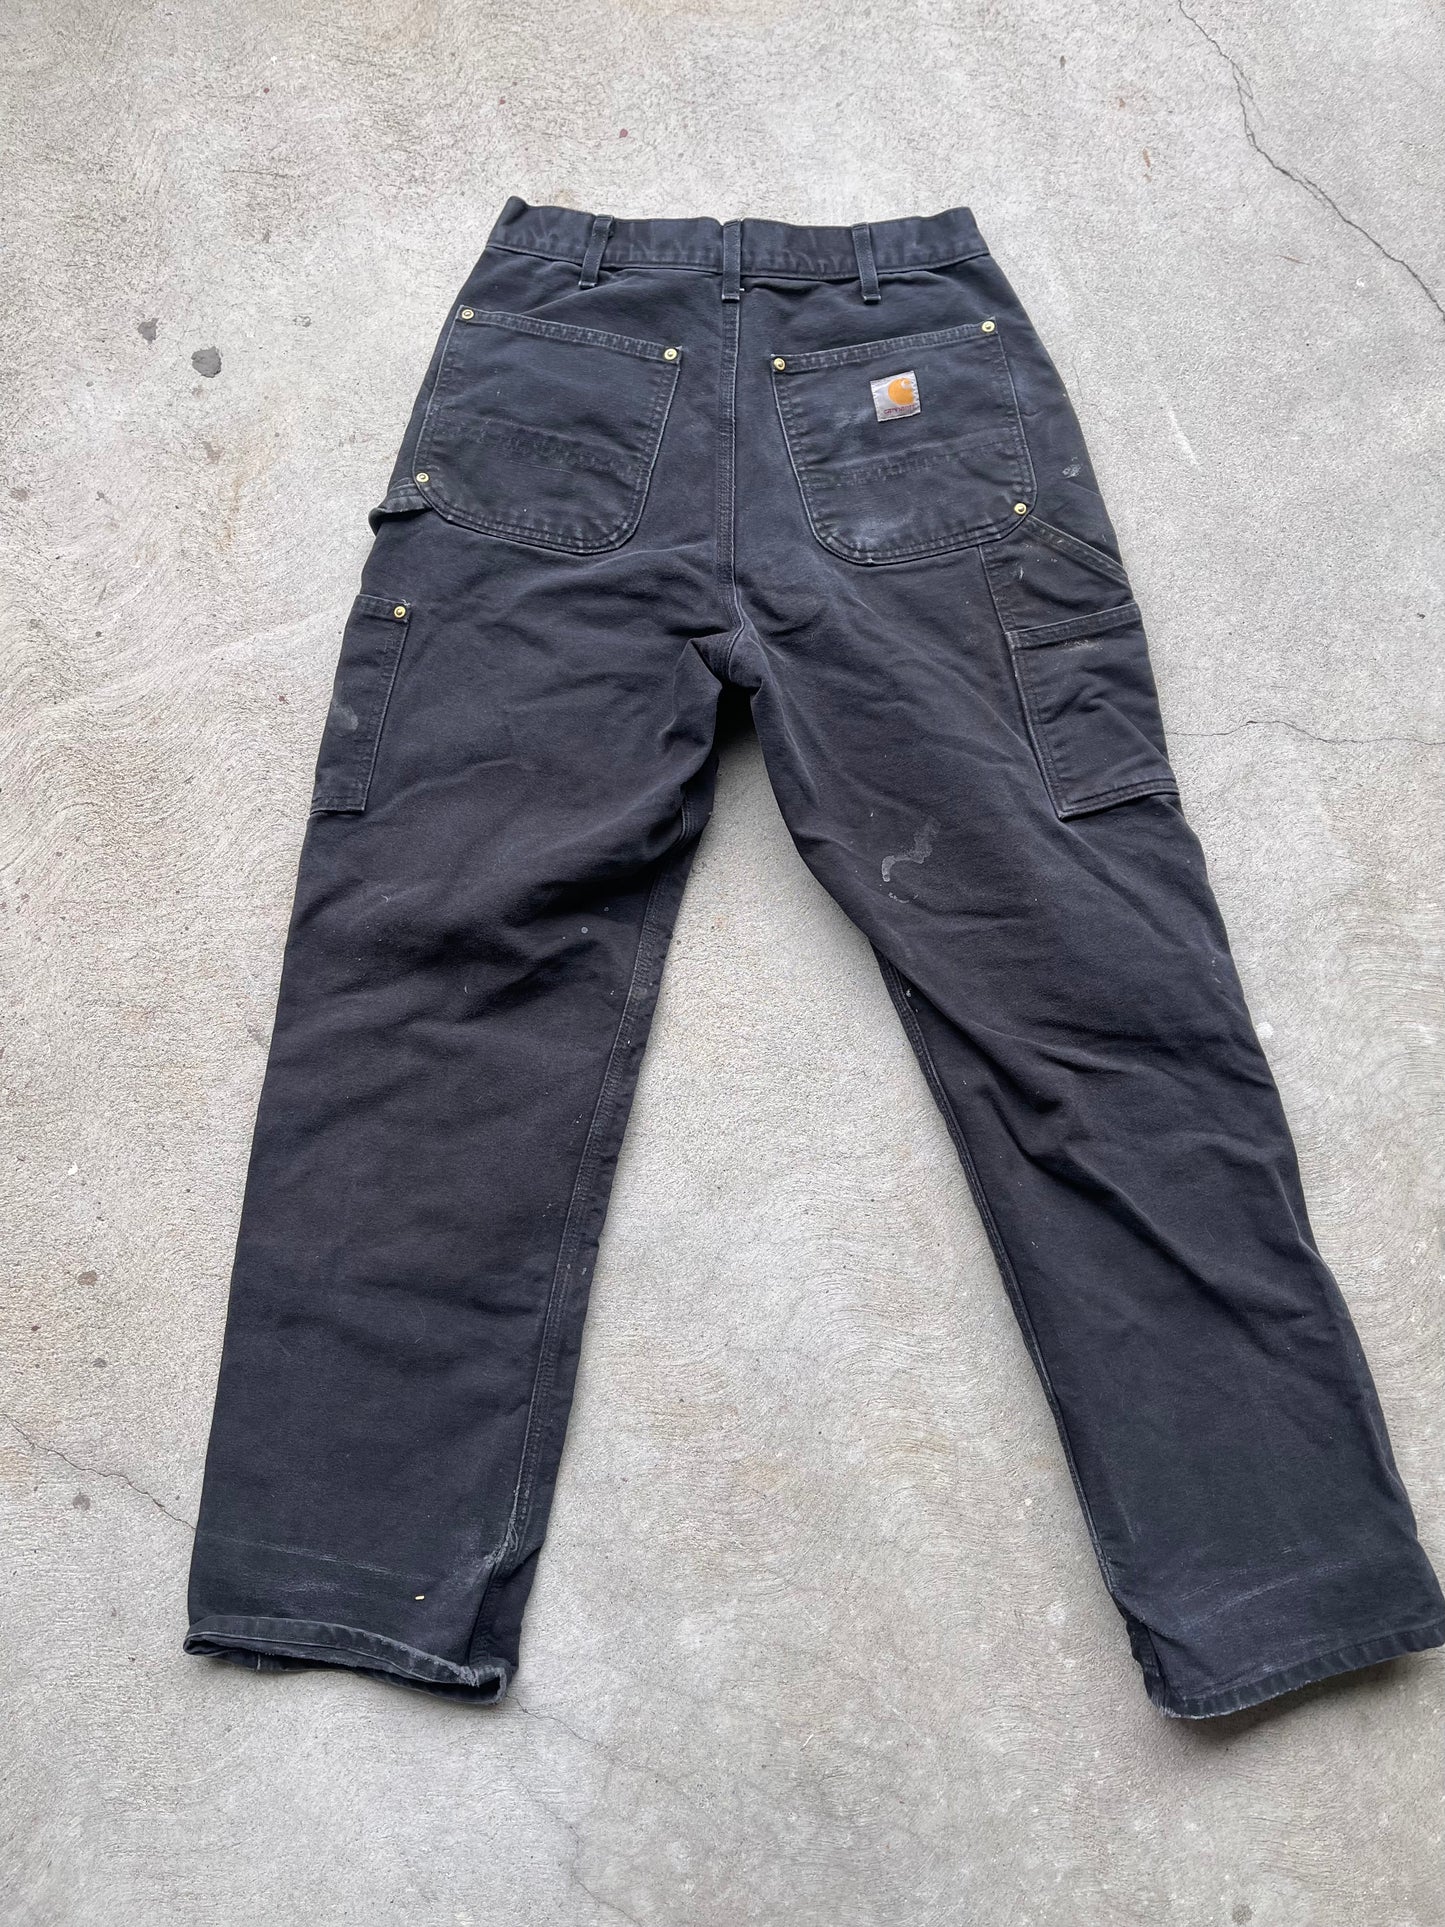 Carhartt Double Knee Canvas Workpant in BLACK - 30" W